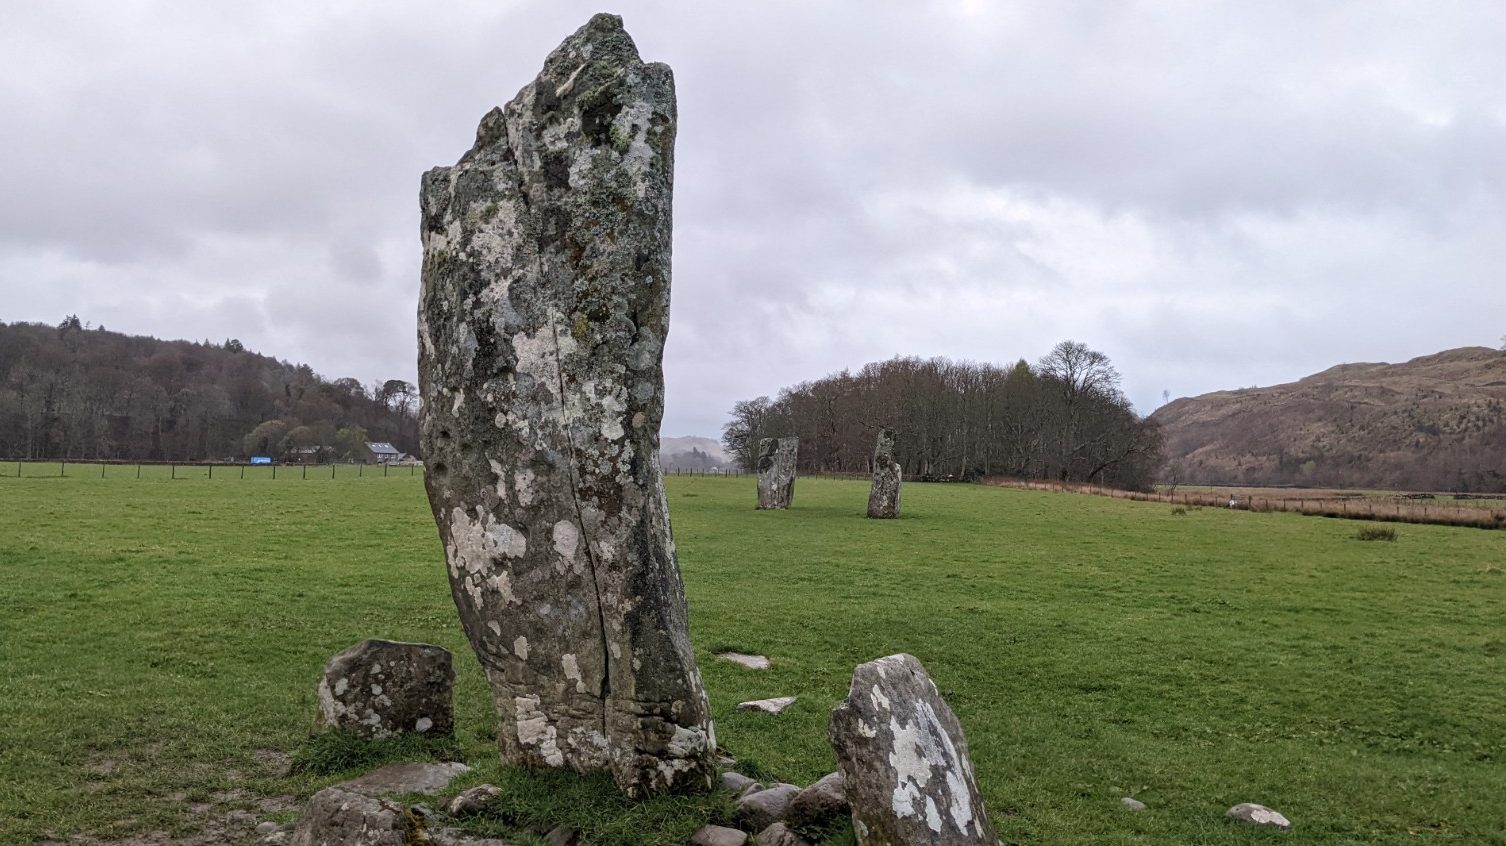 A large grey standing stone bending in an almost convex angle towards the sky stands within a grassy field, with two other standing stones beyond it positioned like hands about to clap. 